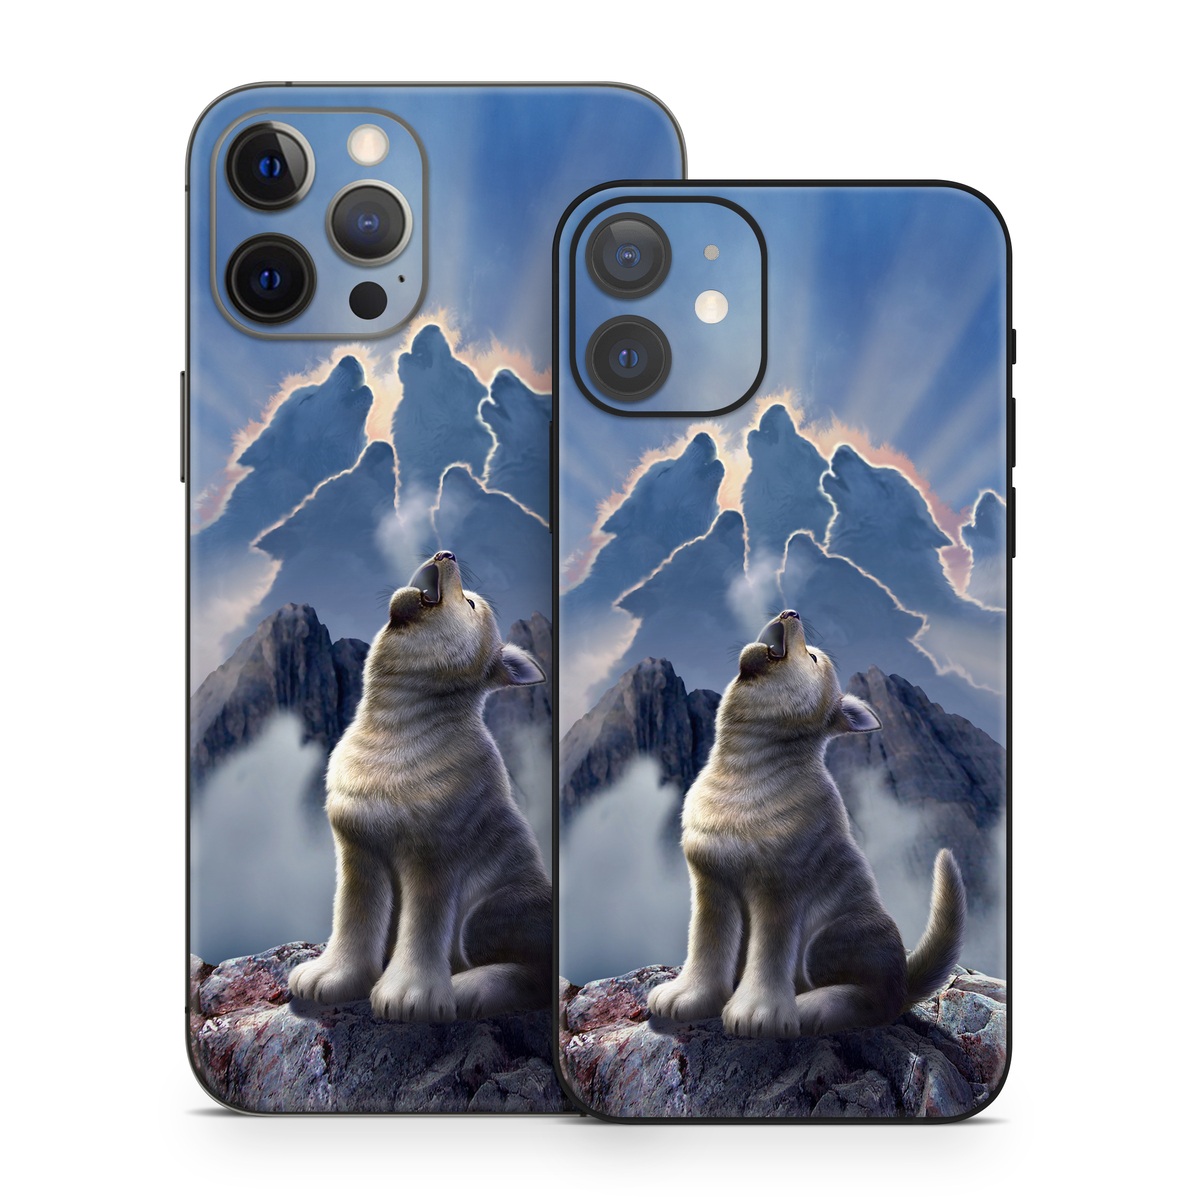 iPhone 12 Series Skin design of Sky, Cloud, Atmosphere, Rock, Wolf, Photography, Cg artwork, Illustration, Mountain, Mythology, with white, blue, gray, brown colors